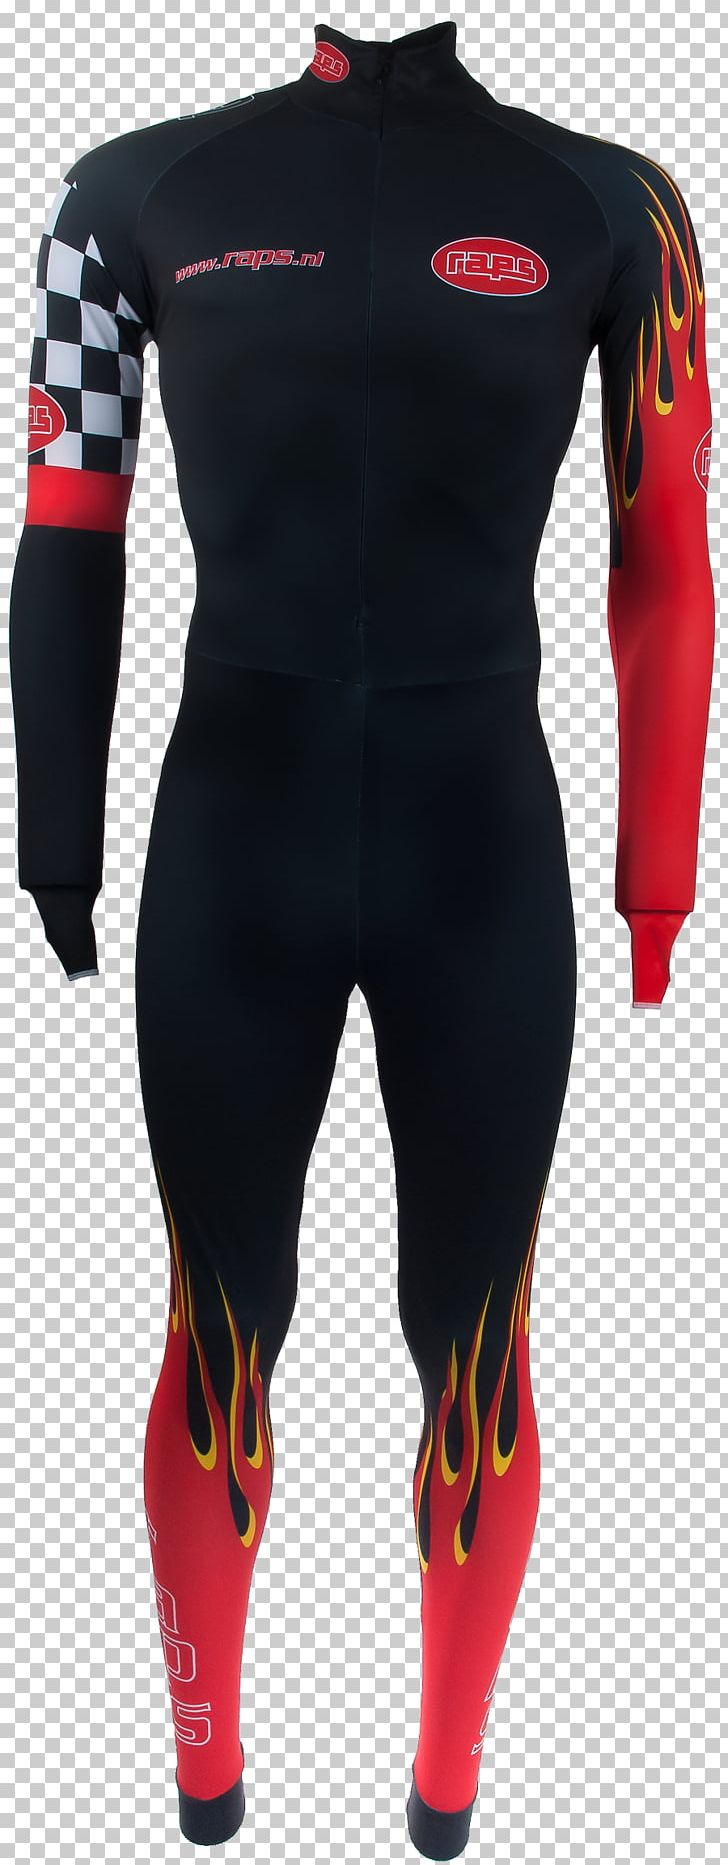 Wetsuit PNG, Clipart, Ice Skating, Personal Protective Equipment, Sleeve, Sportswear, Wetsuit Free PNG Download